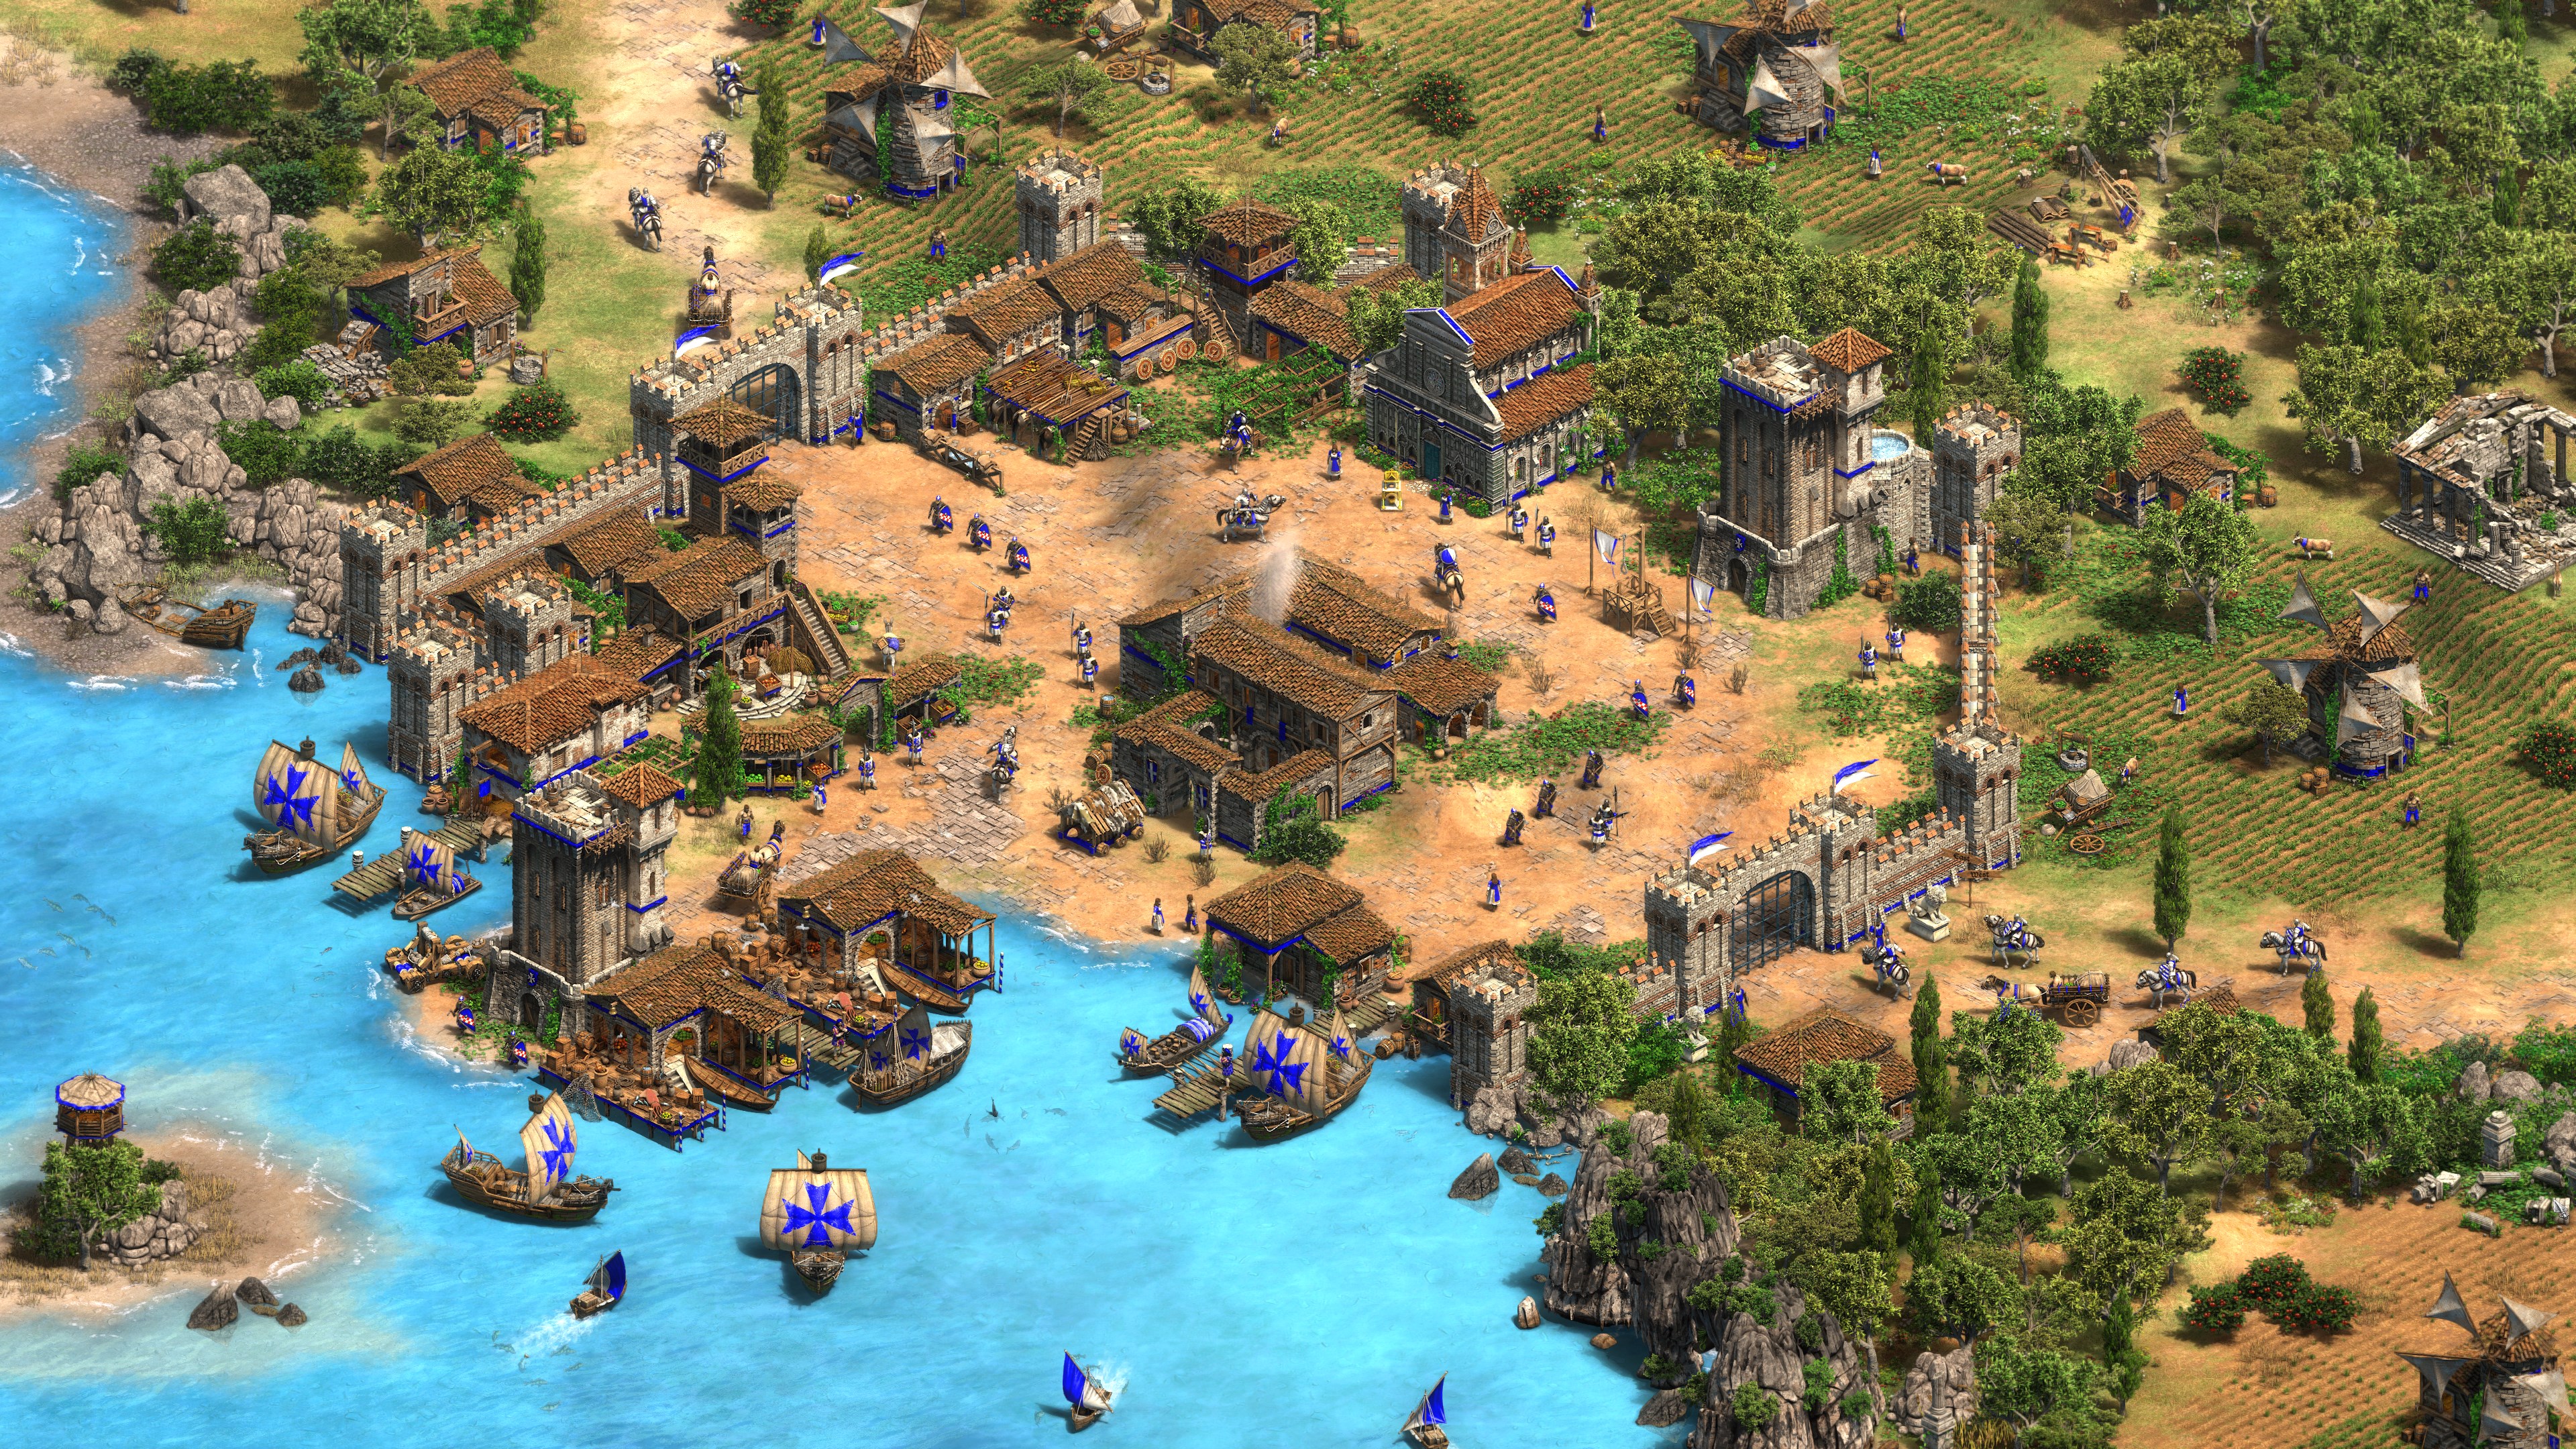 Age of Empires II: Definitive Edition - Lords of the West screenshot 52466